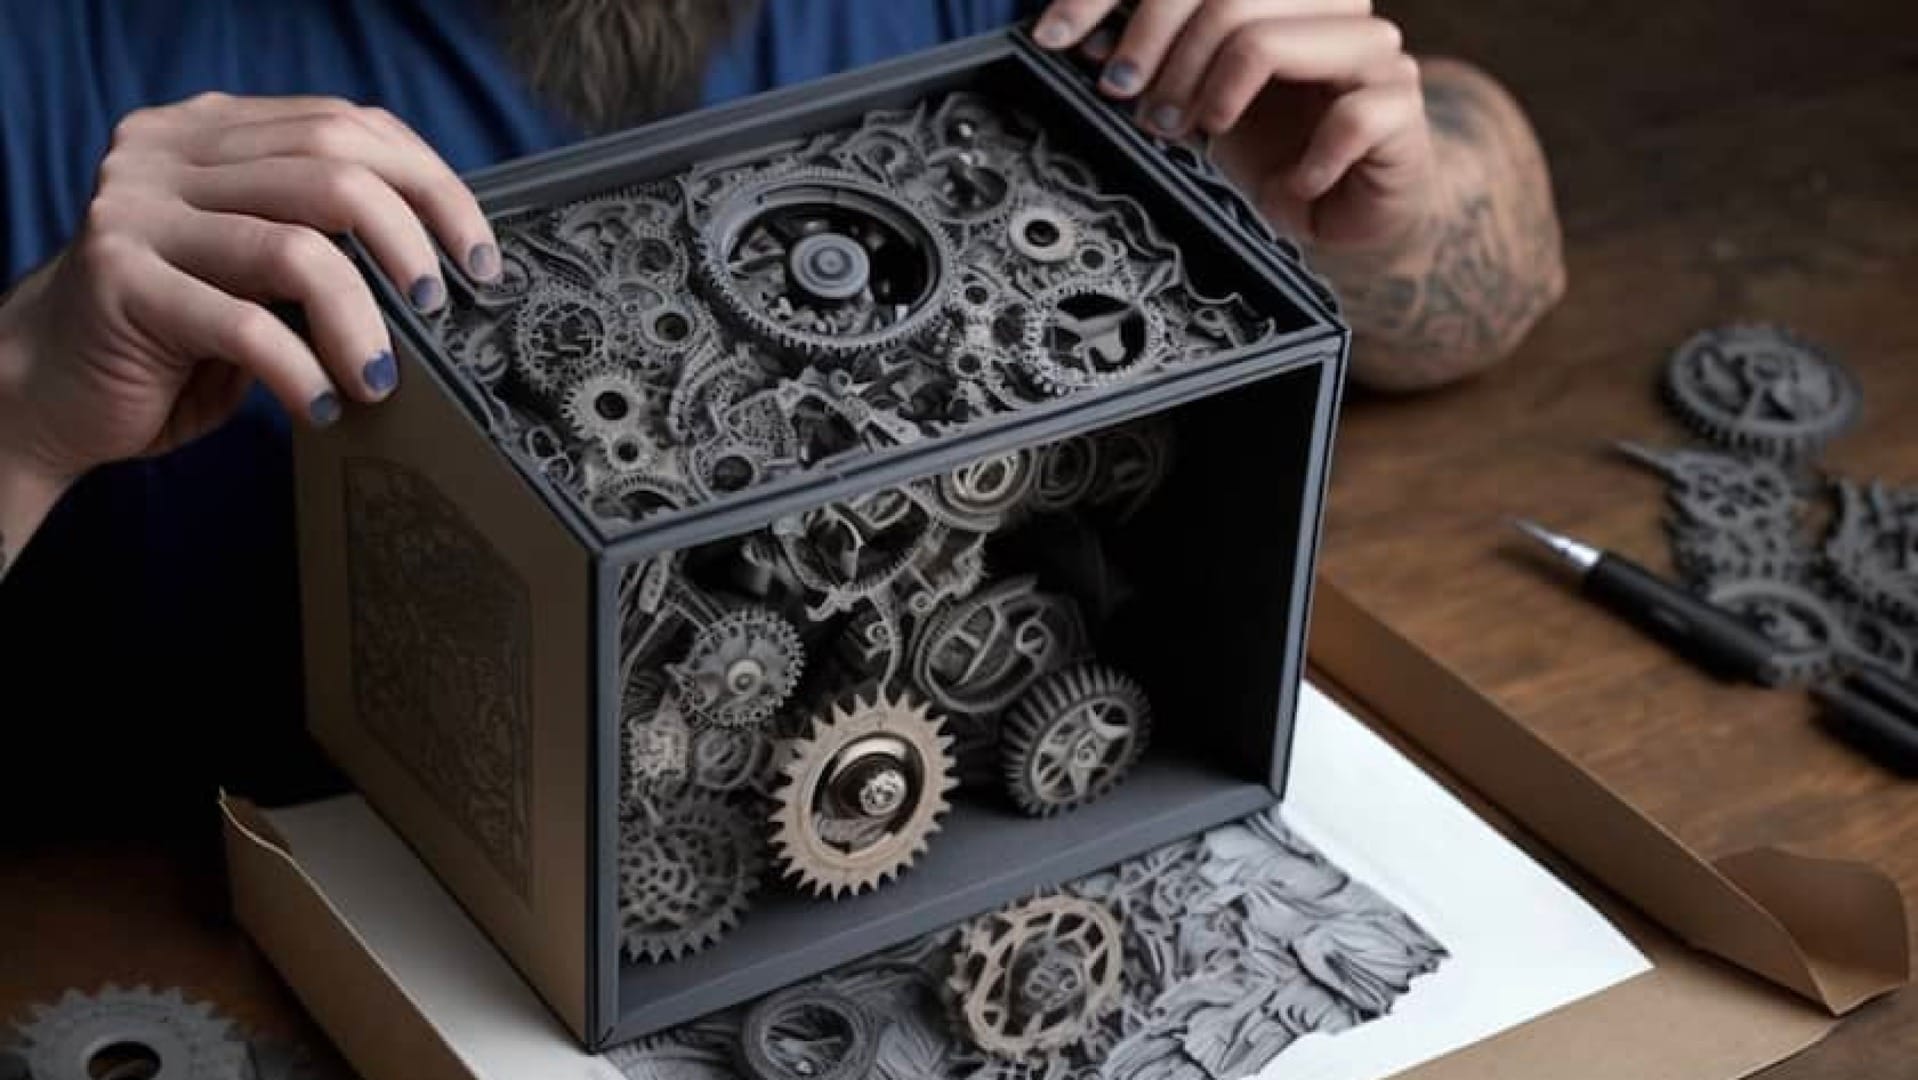 Box with multiple gears showing the complexity of how something works relating to Lidar technology 